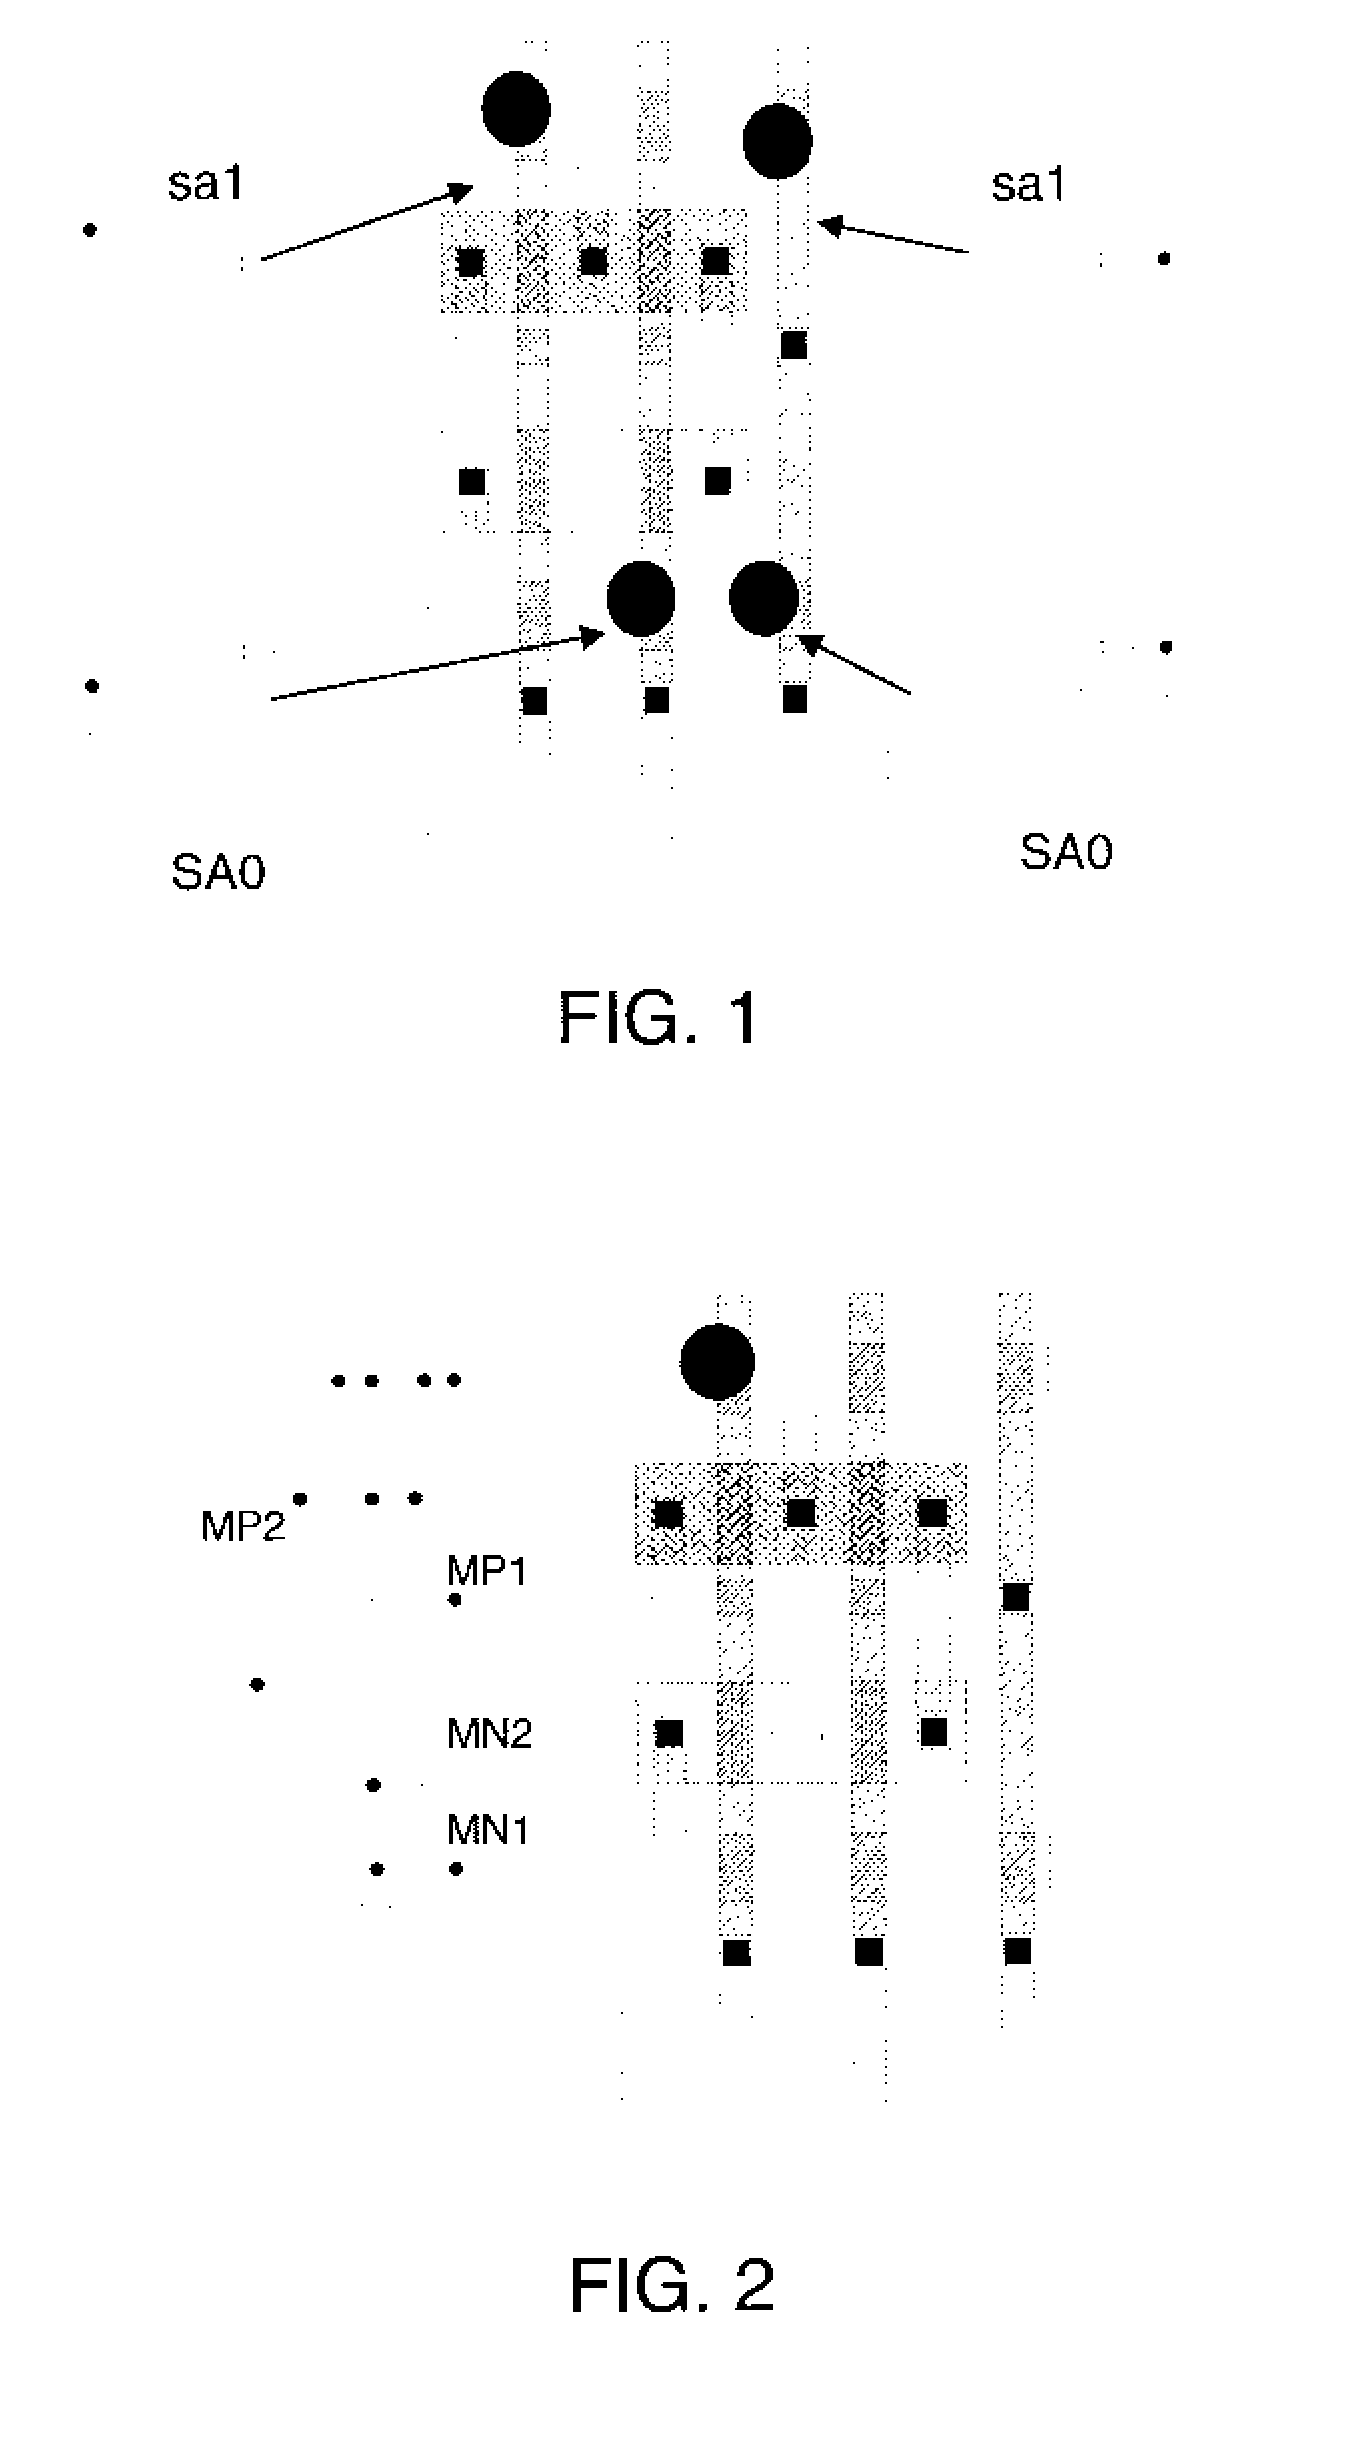 Method and System for Performing Functional Formal Verification of Logic Circuits